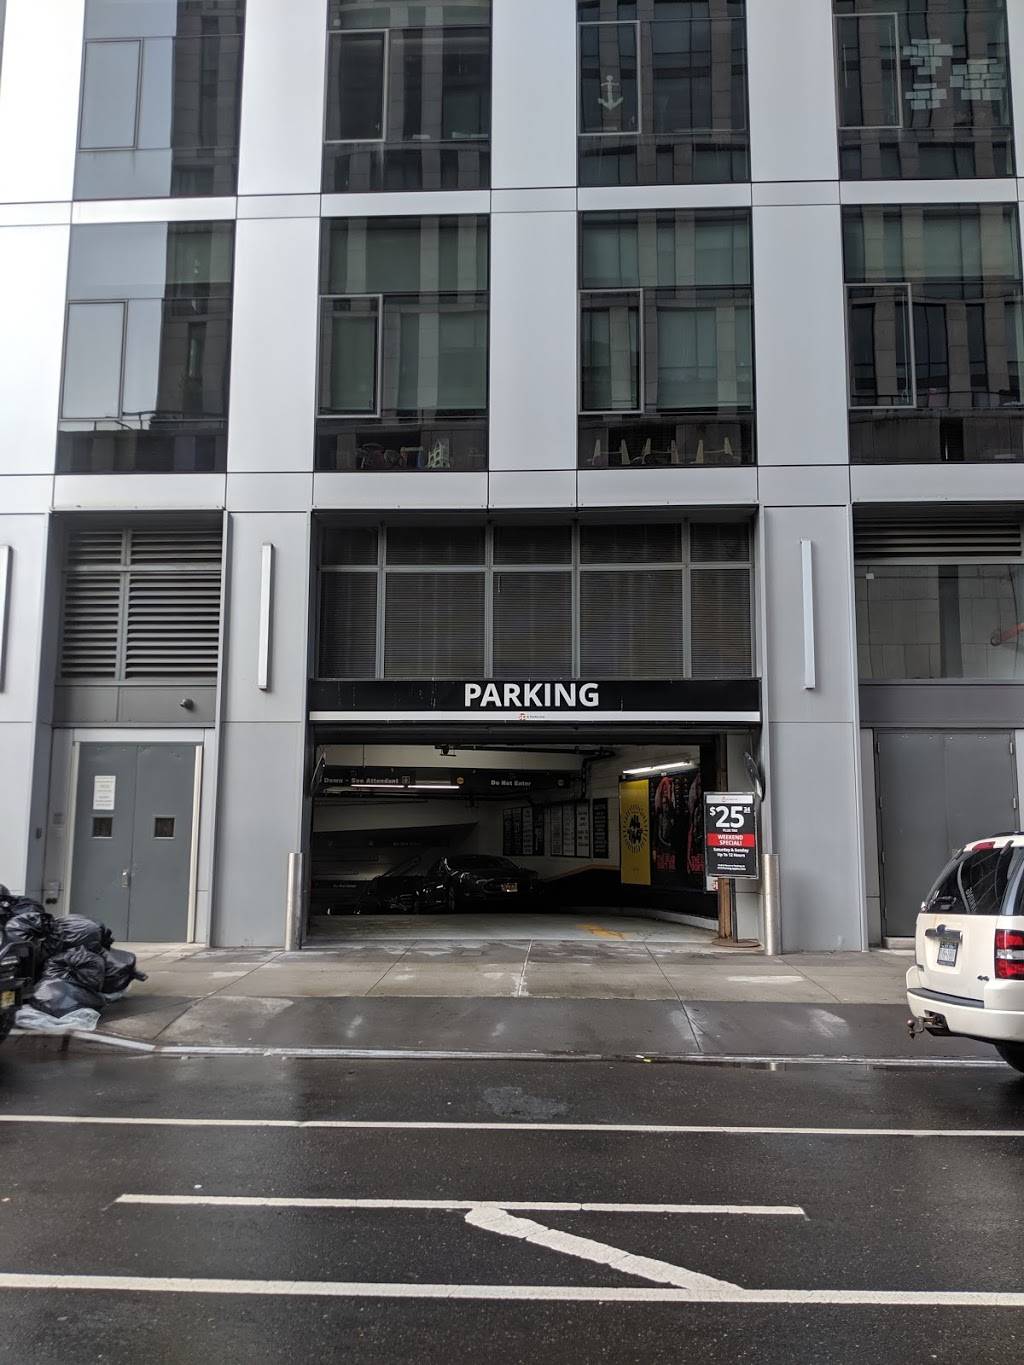 SP+ Parking - parking  | Photo 4 of 5 | Address: 200 Chambers St, New York, NY 10007, USA | Phone: (800) 836-6666